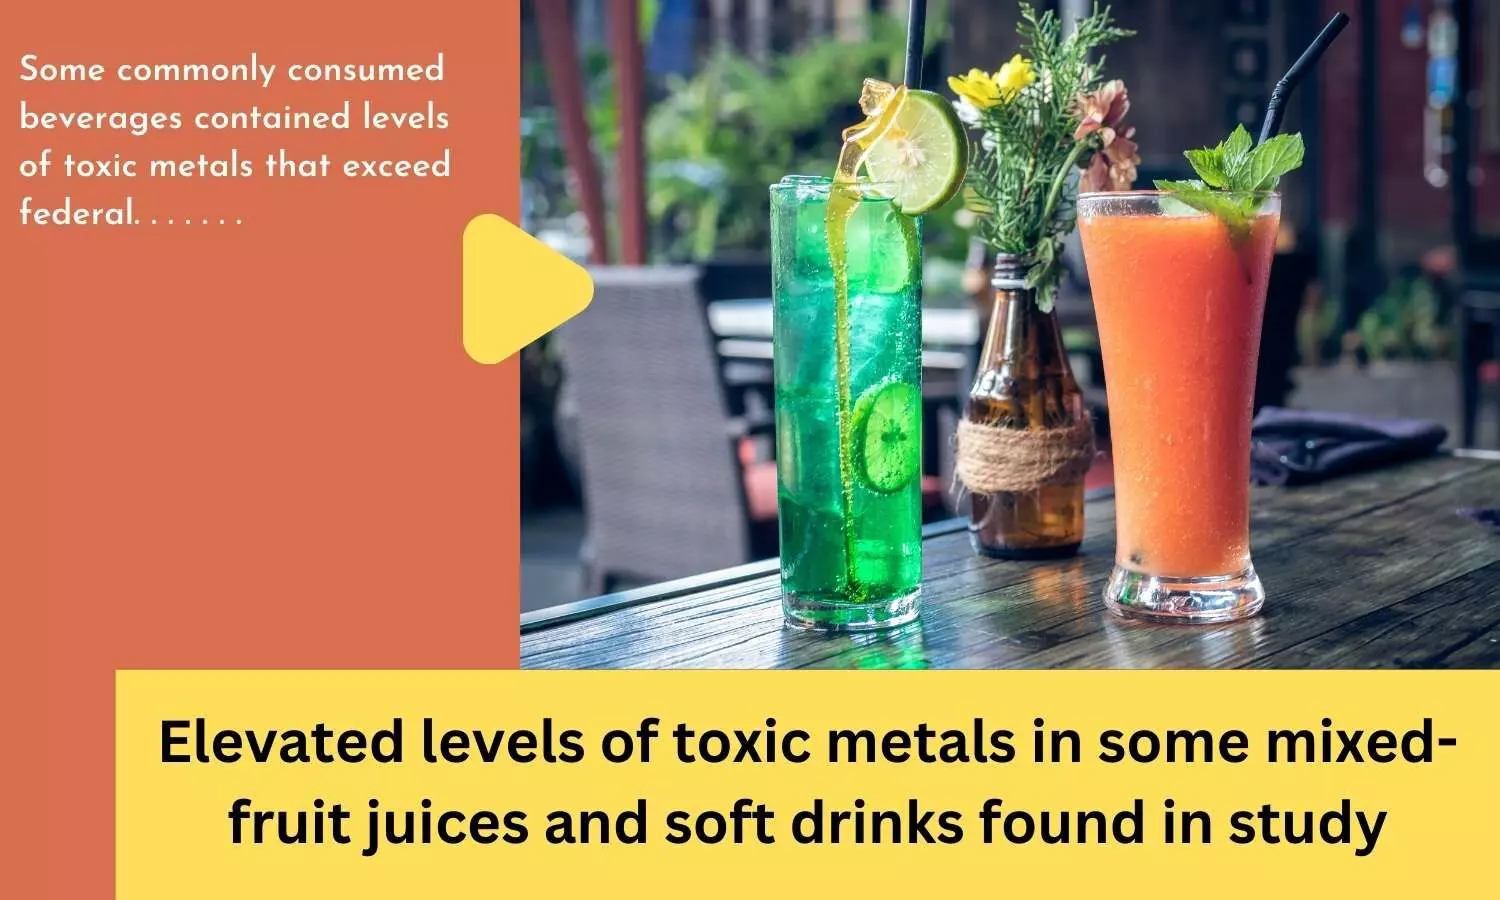 Elevated levels of toxic metals in some mixed-fruit juices and soft drinks found in study